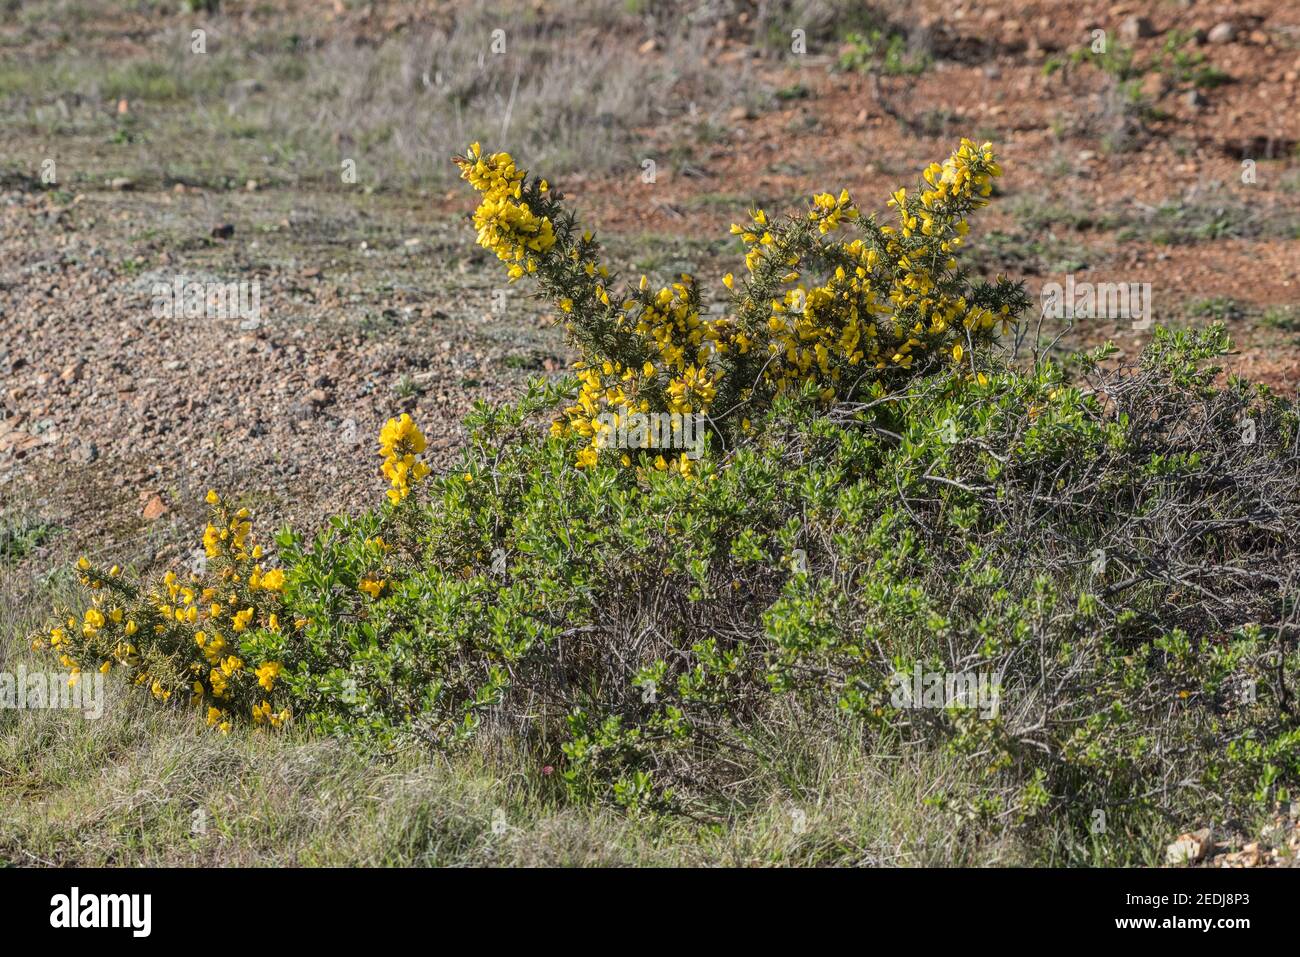 Gorse (Ulex europaeus) growing wild in the Golden gate National recreation area in California where it is a nonnative introduced species. Stock Photo